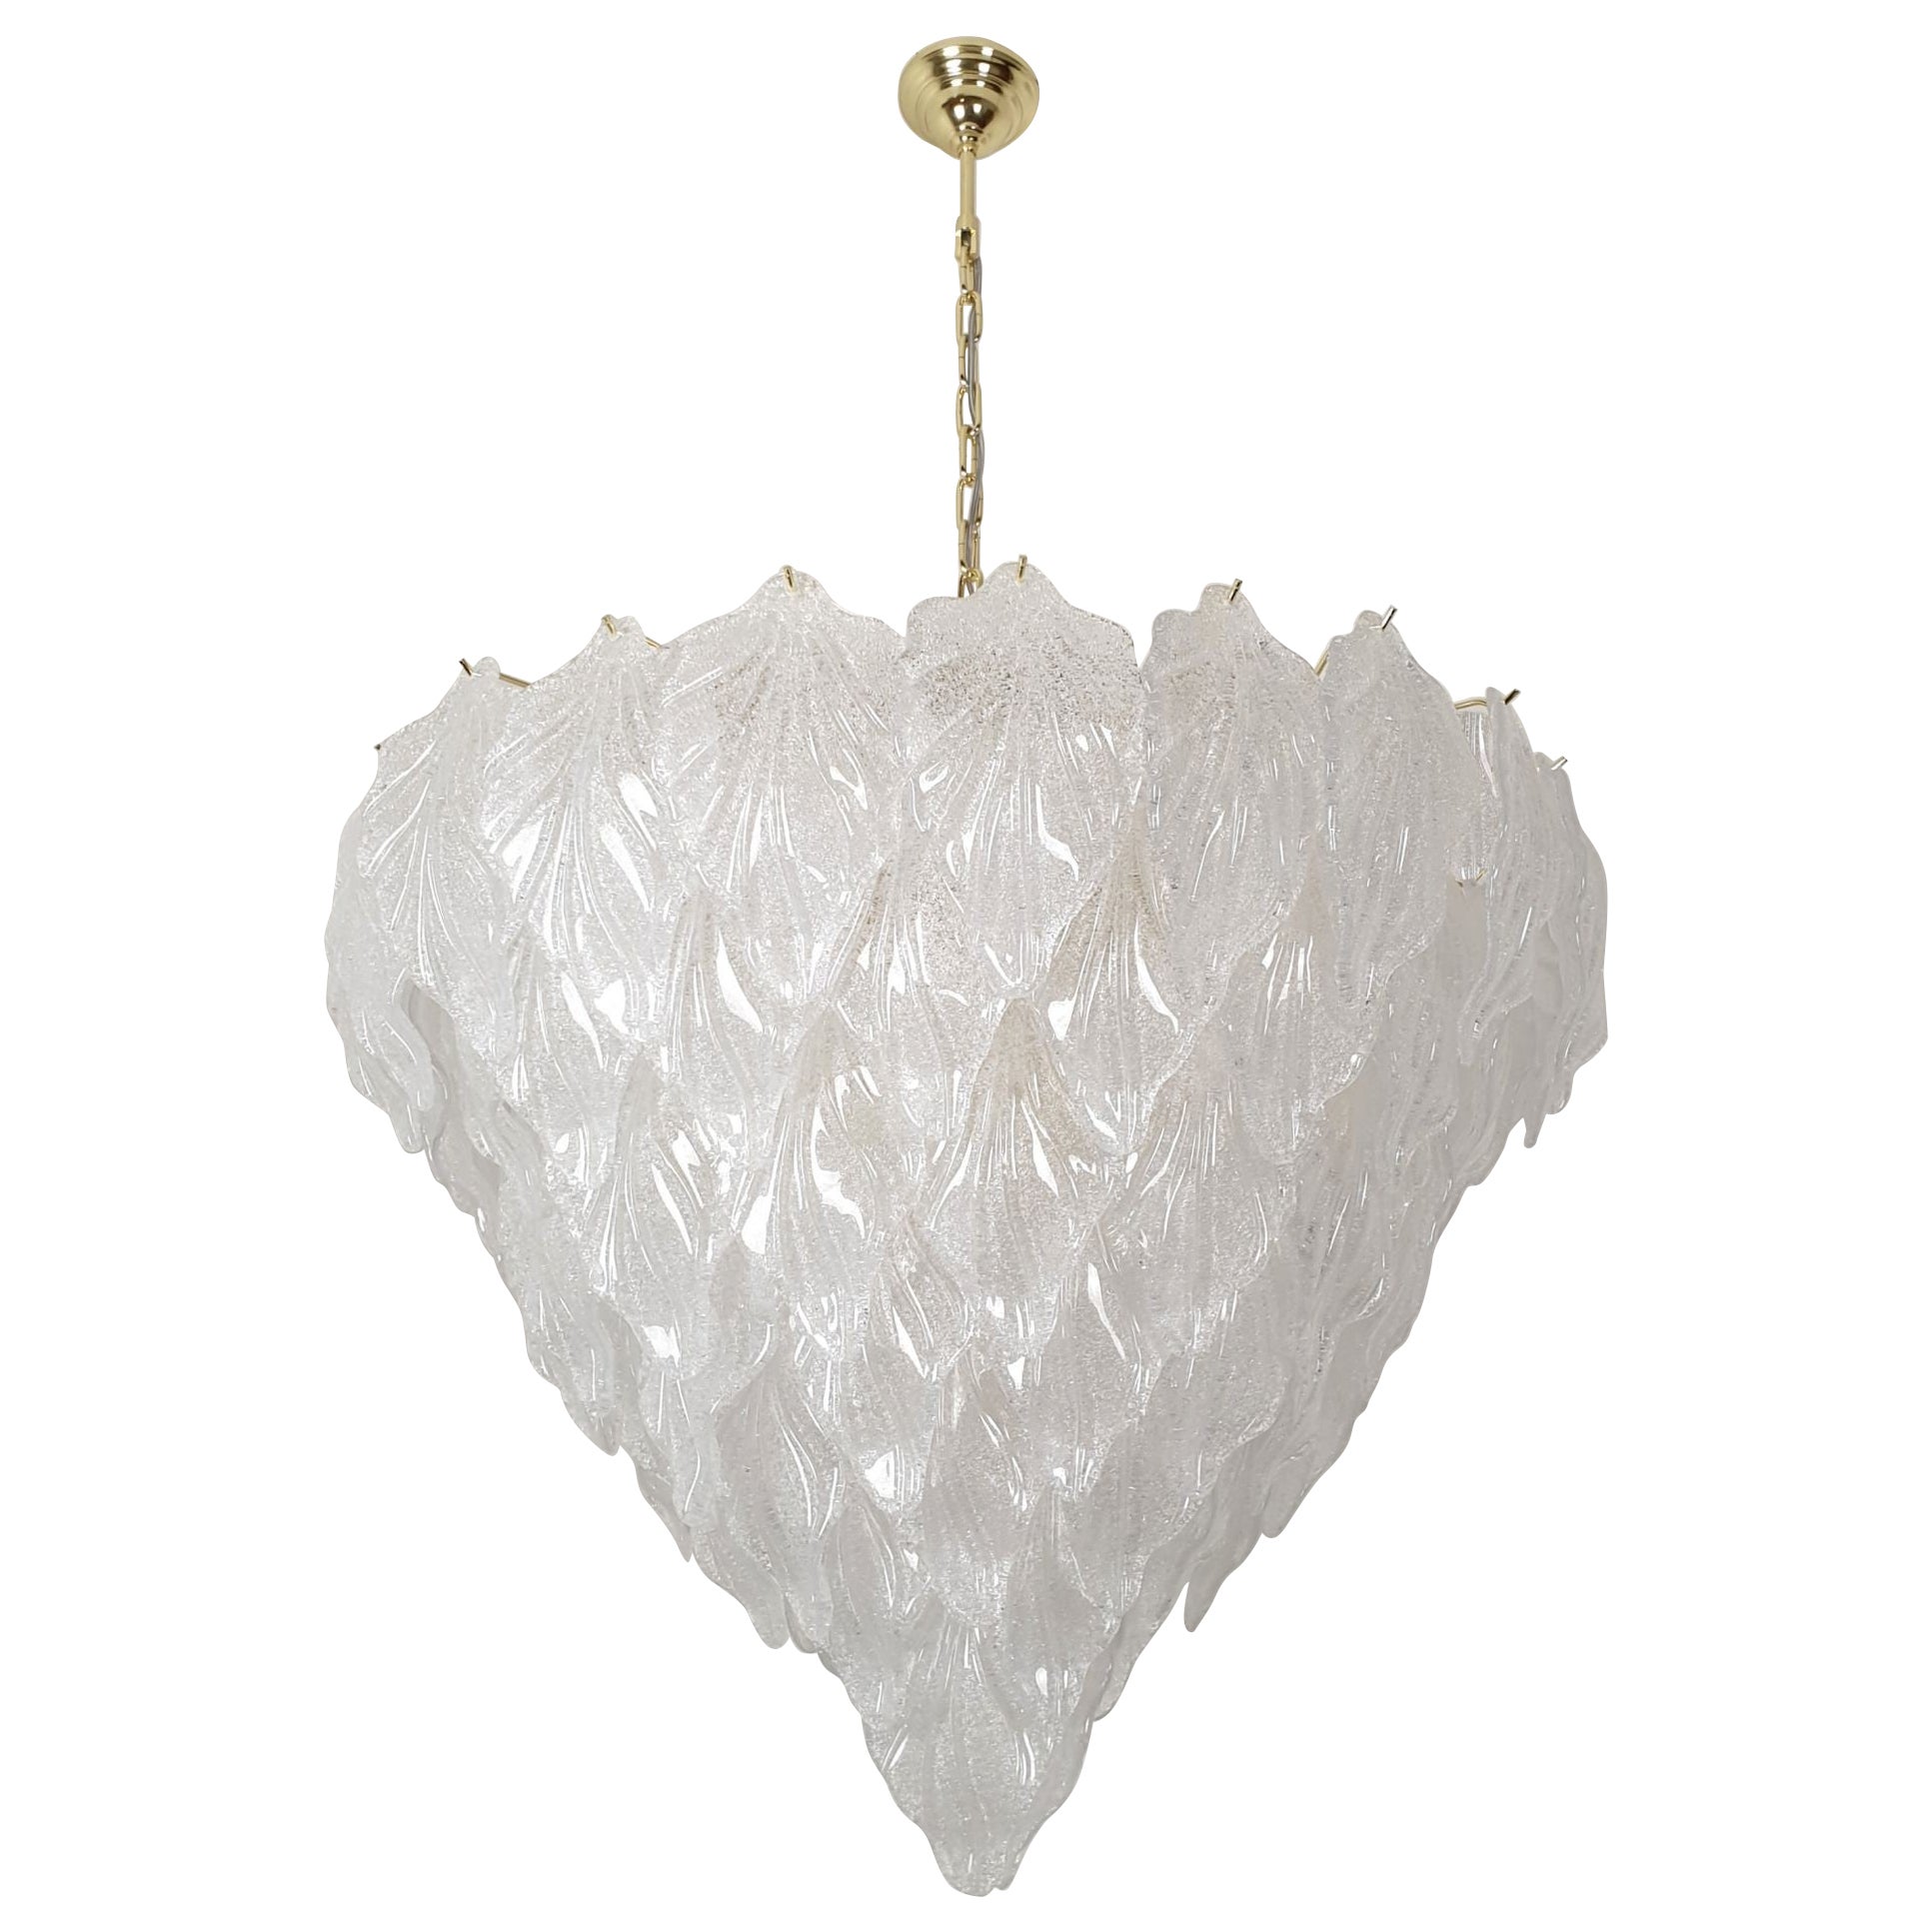 Murano glass clear leaves chandelier Italy